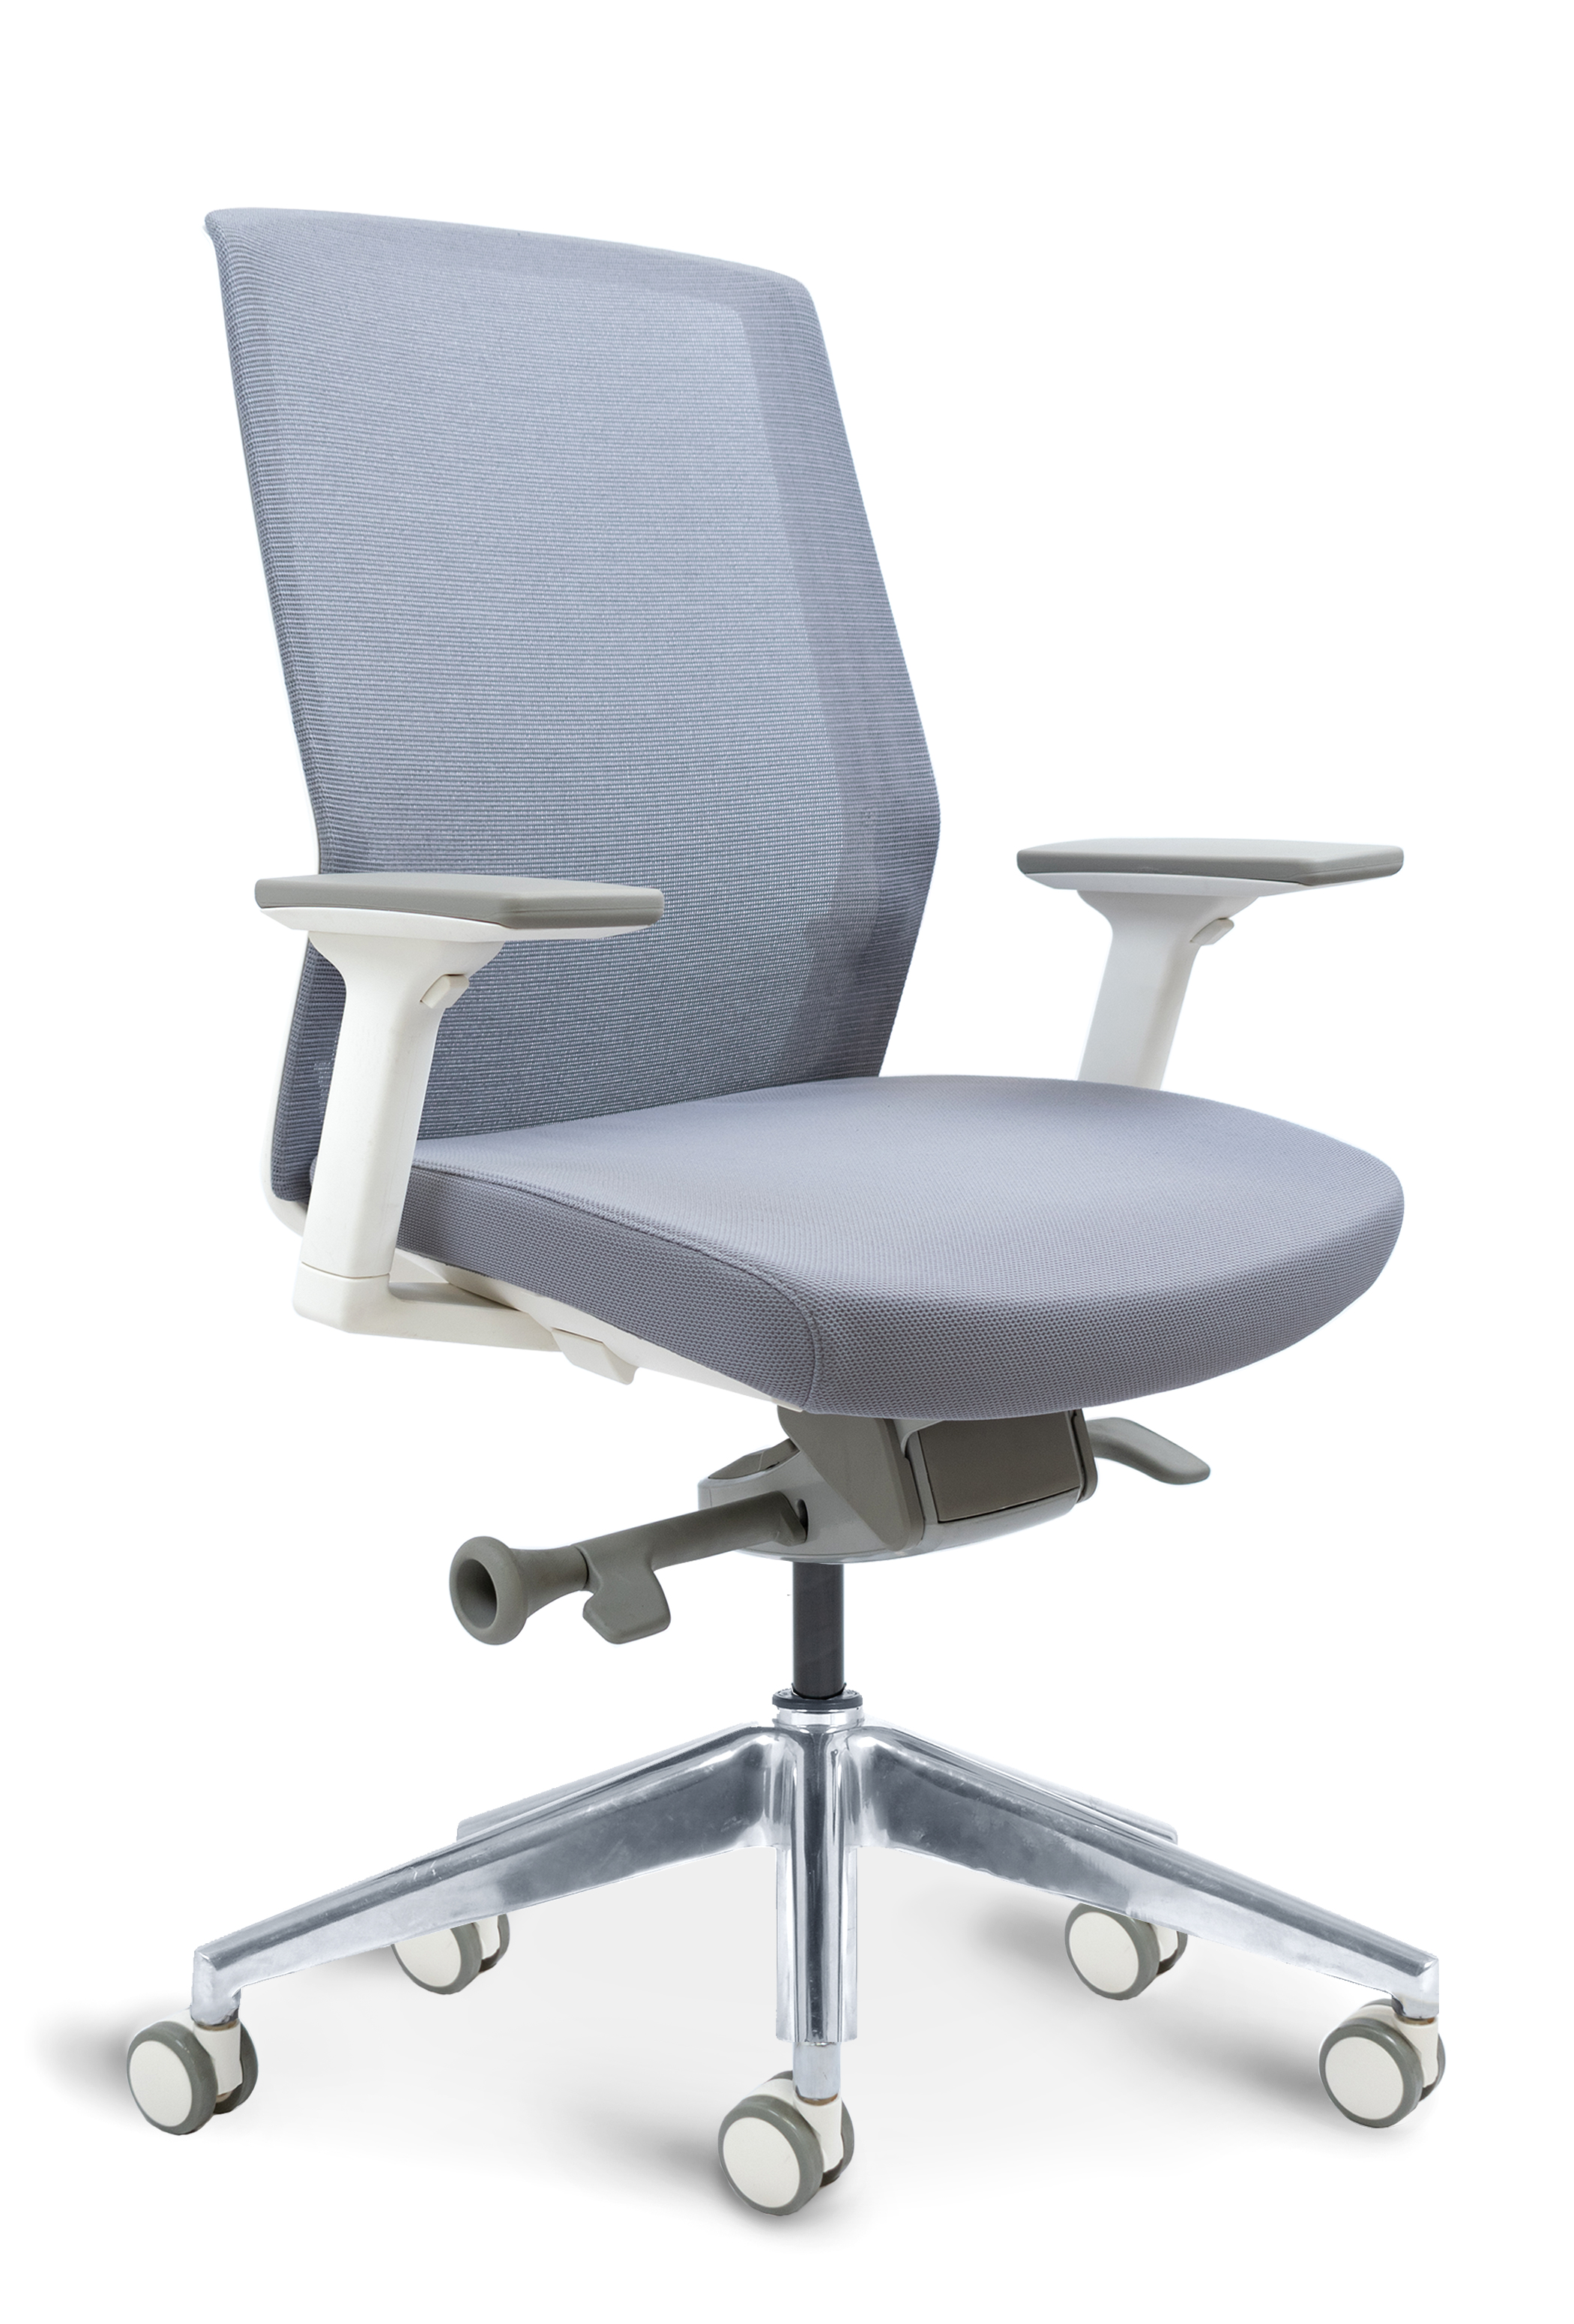 WS - J1 task chair - White (Front Angle)